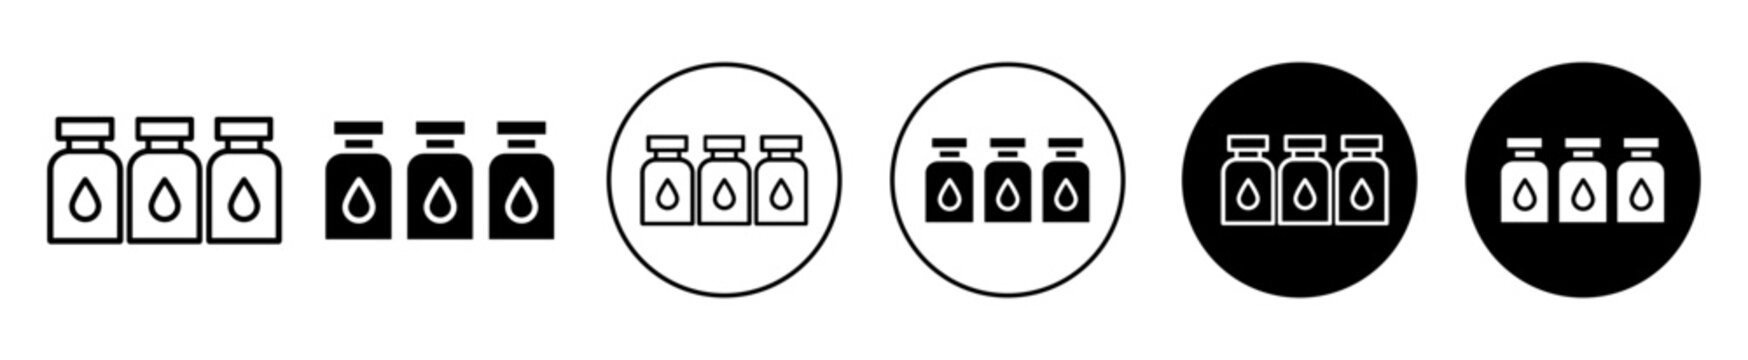 Ink cartridge drop bottle vector icon in filled and outline style symbol 